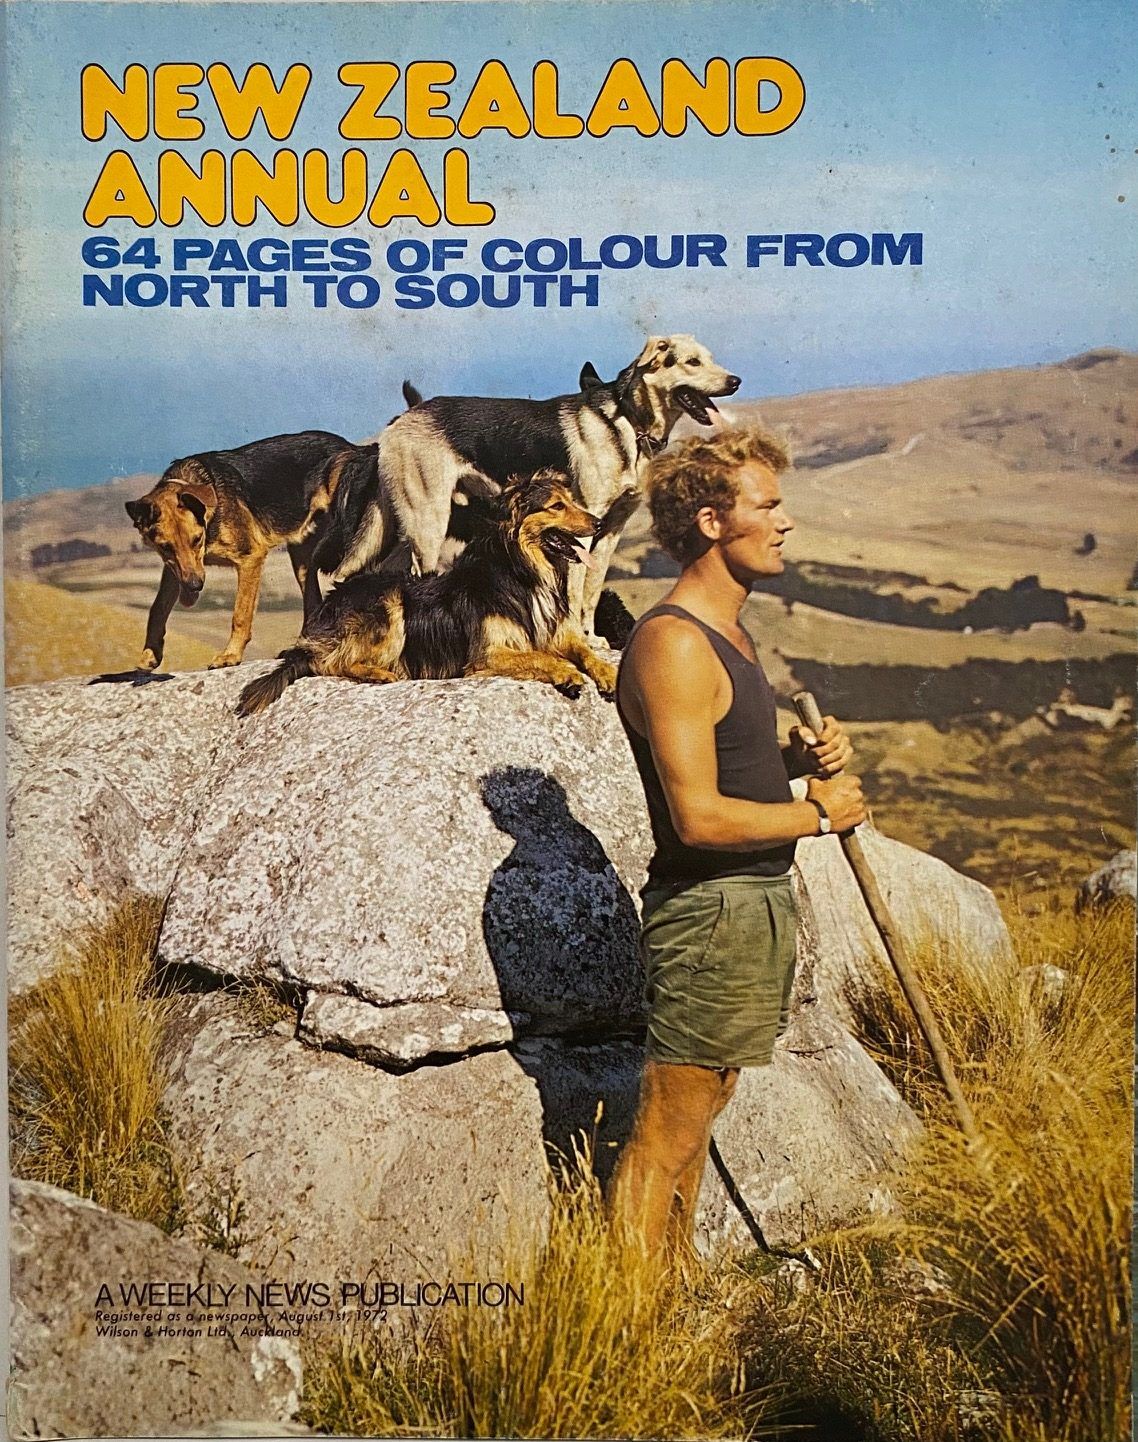 NEW ZEALAND ANNUAL: 64 Pages of Colour From North to South